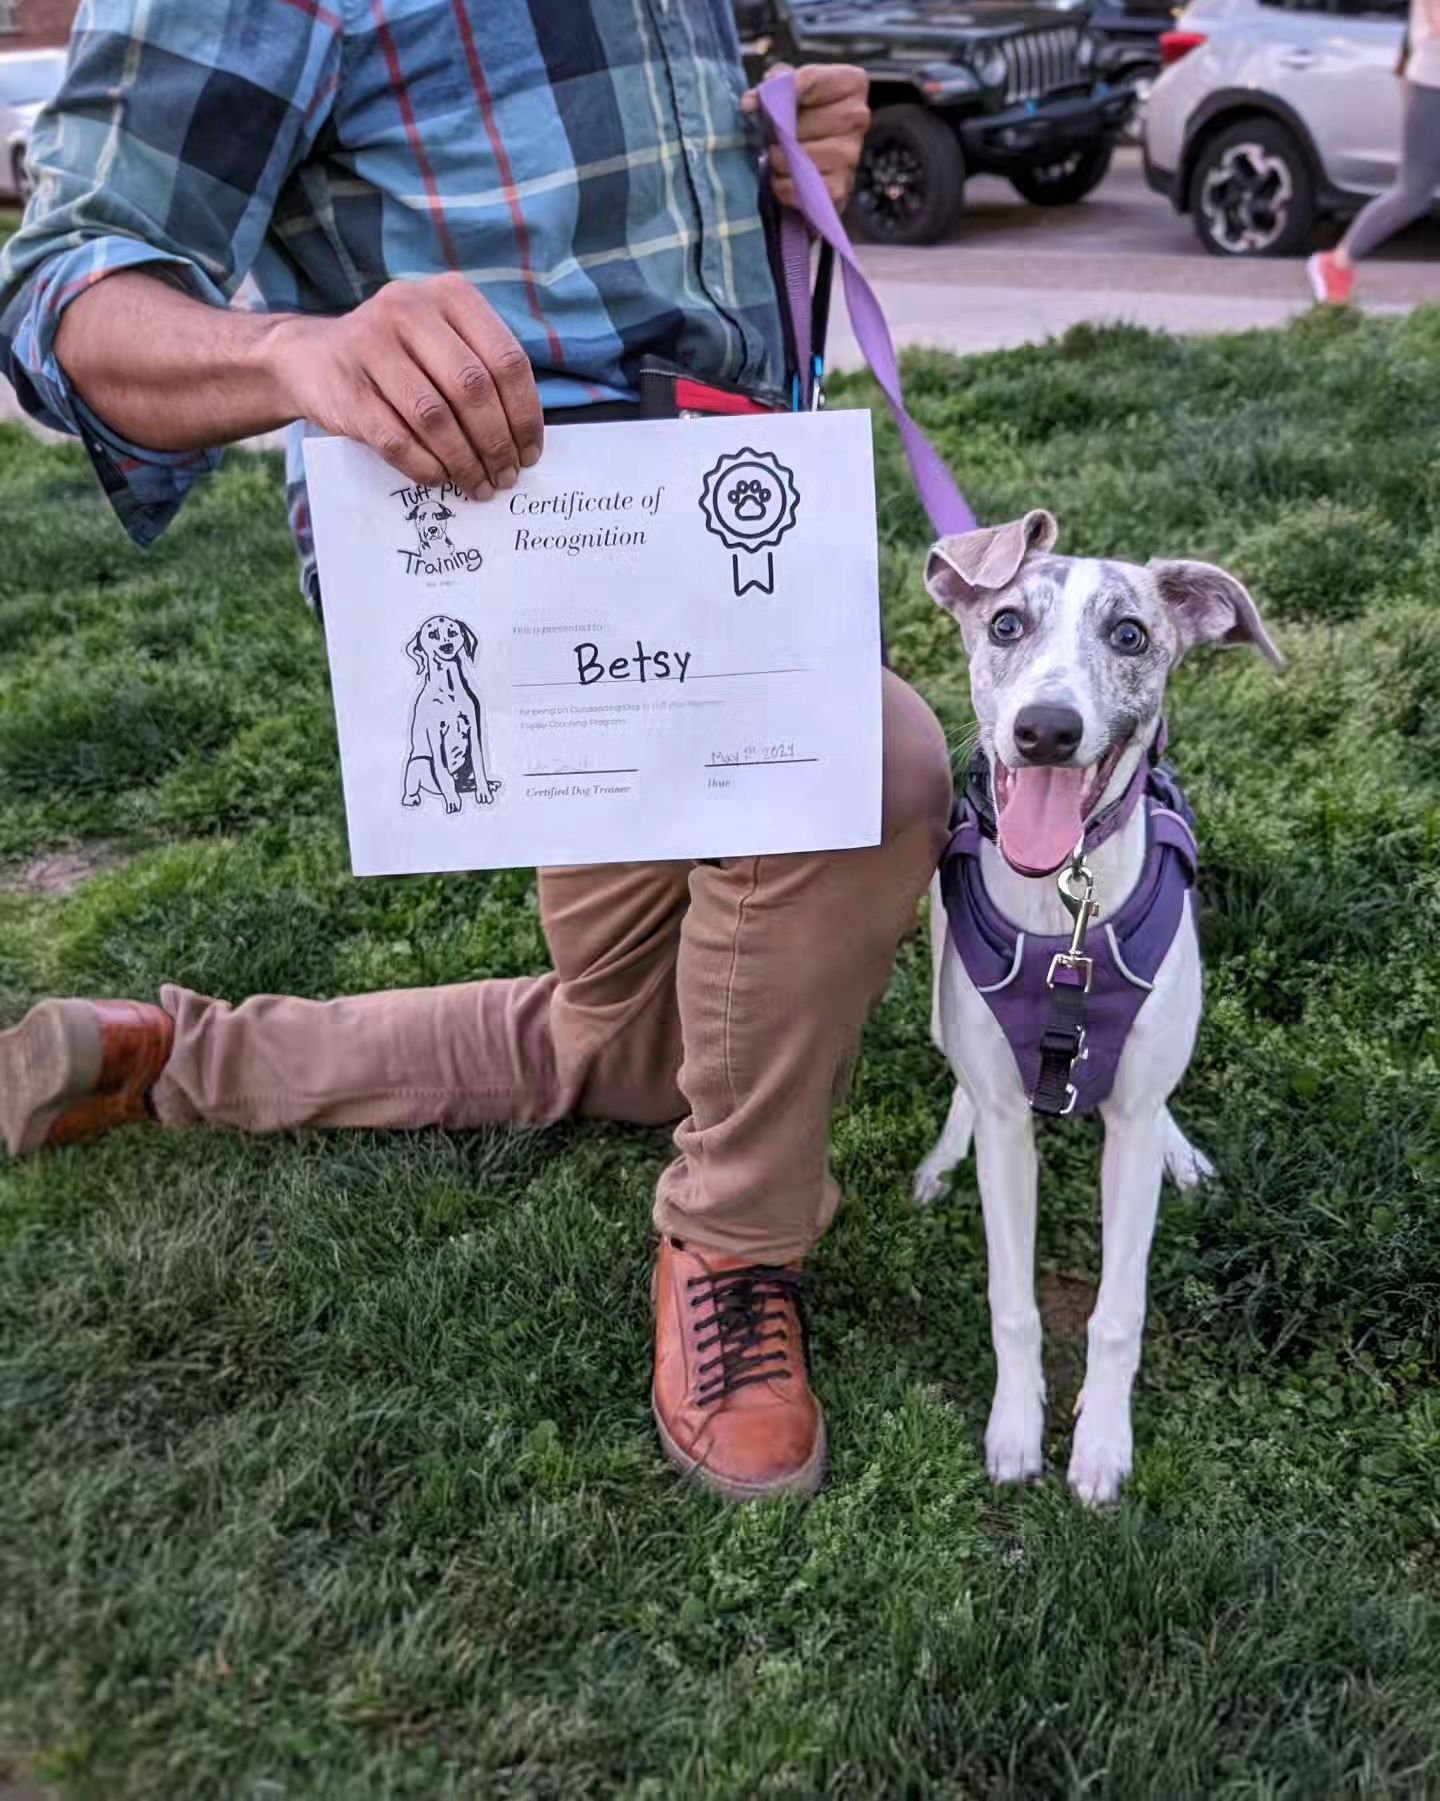 Betsy graduated! 🎓
.
.
.
#dogtra#dogtrainersig #dogtraining #dogs #philly #phillydogs #phillypups #dogsofphilly #clickertraining #cute #woof #215dogs